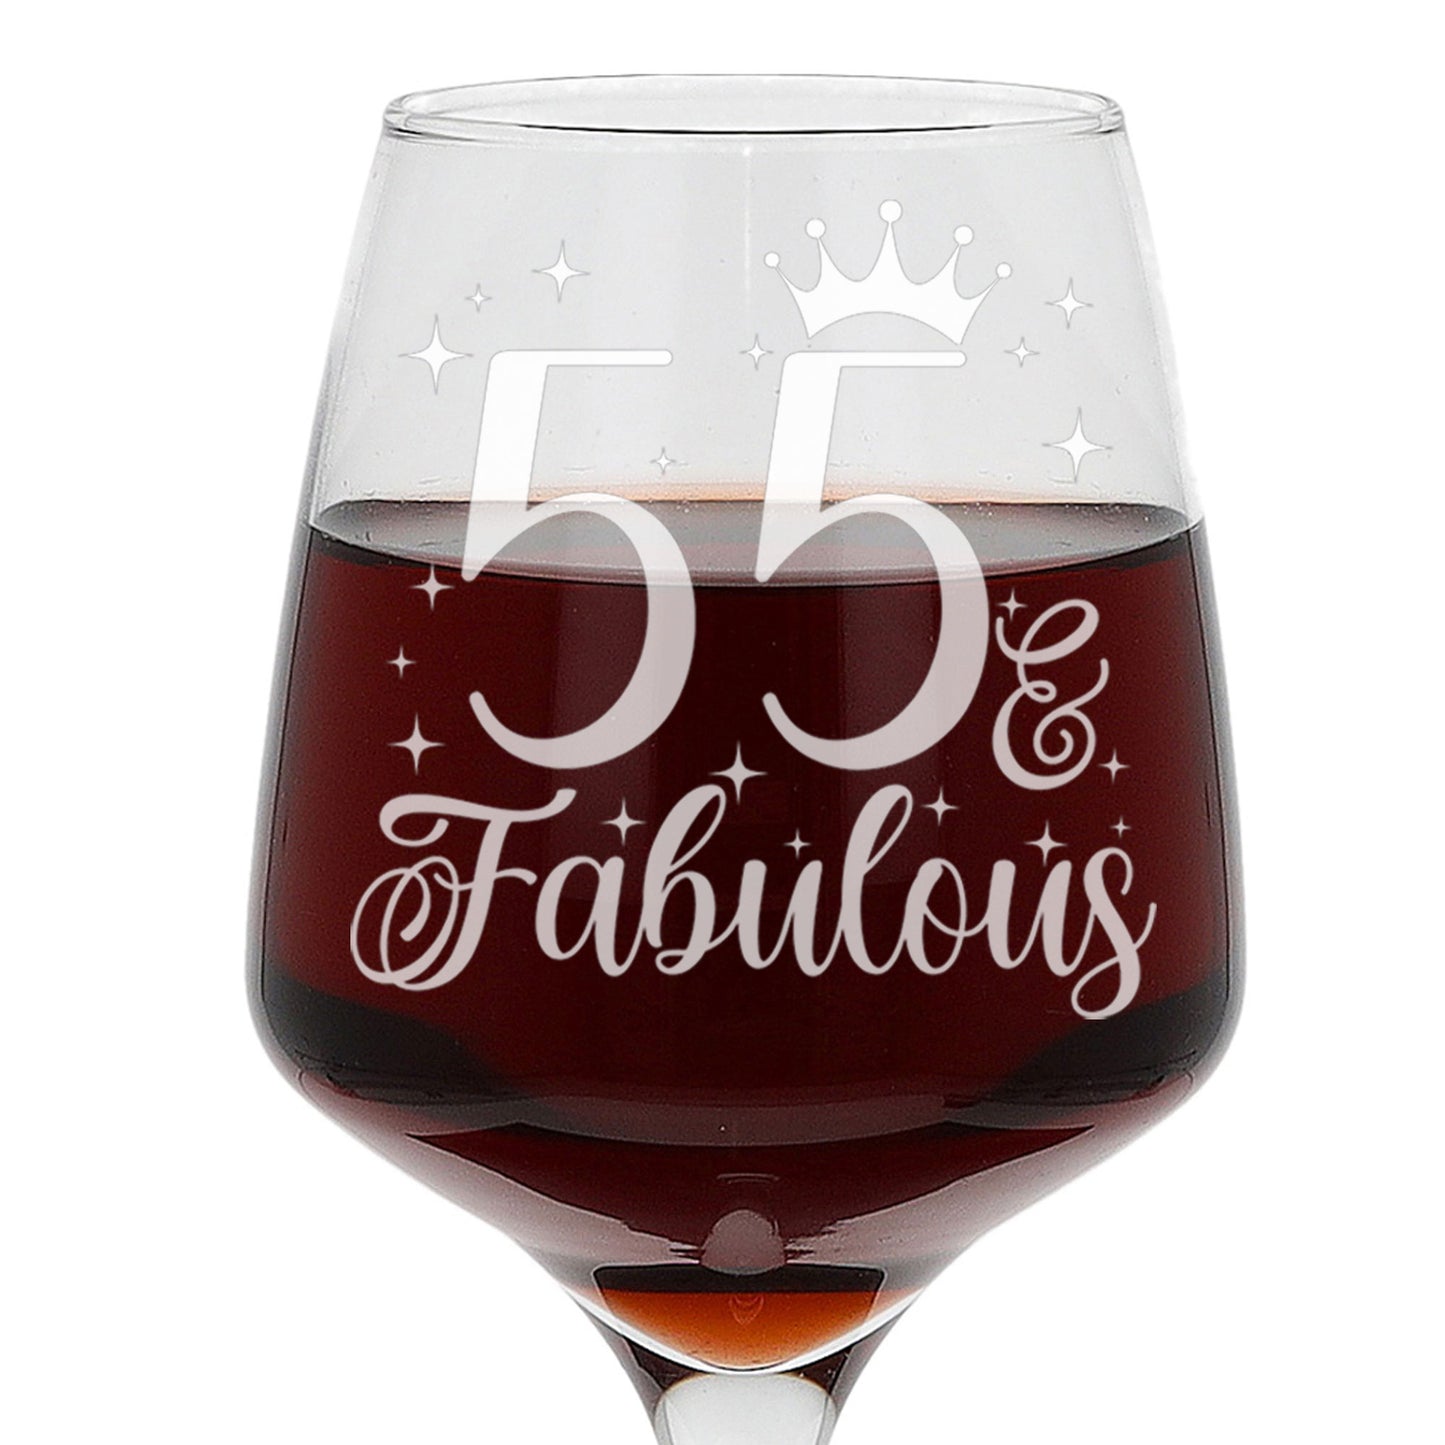 55 & Fabulous 55th Birthday Gift Engraved Wine Glass and/or Coaster Set  - Always Looking Good -   